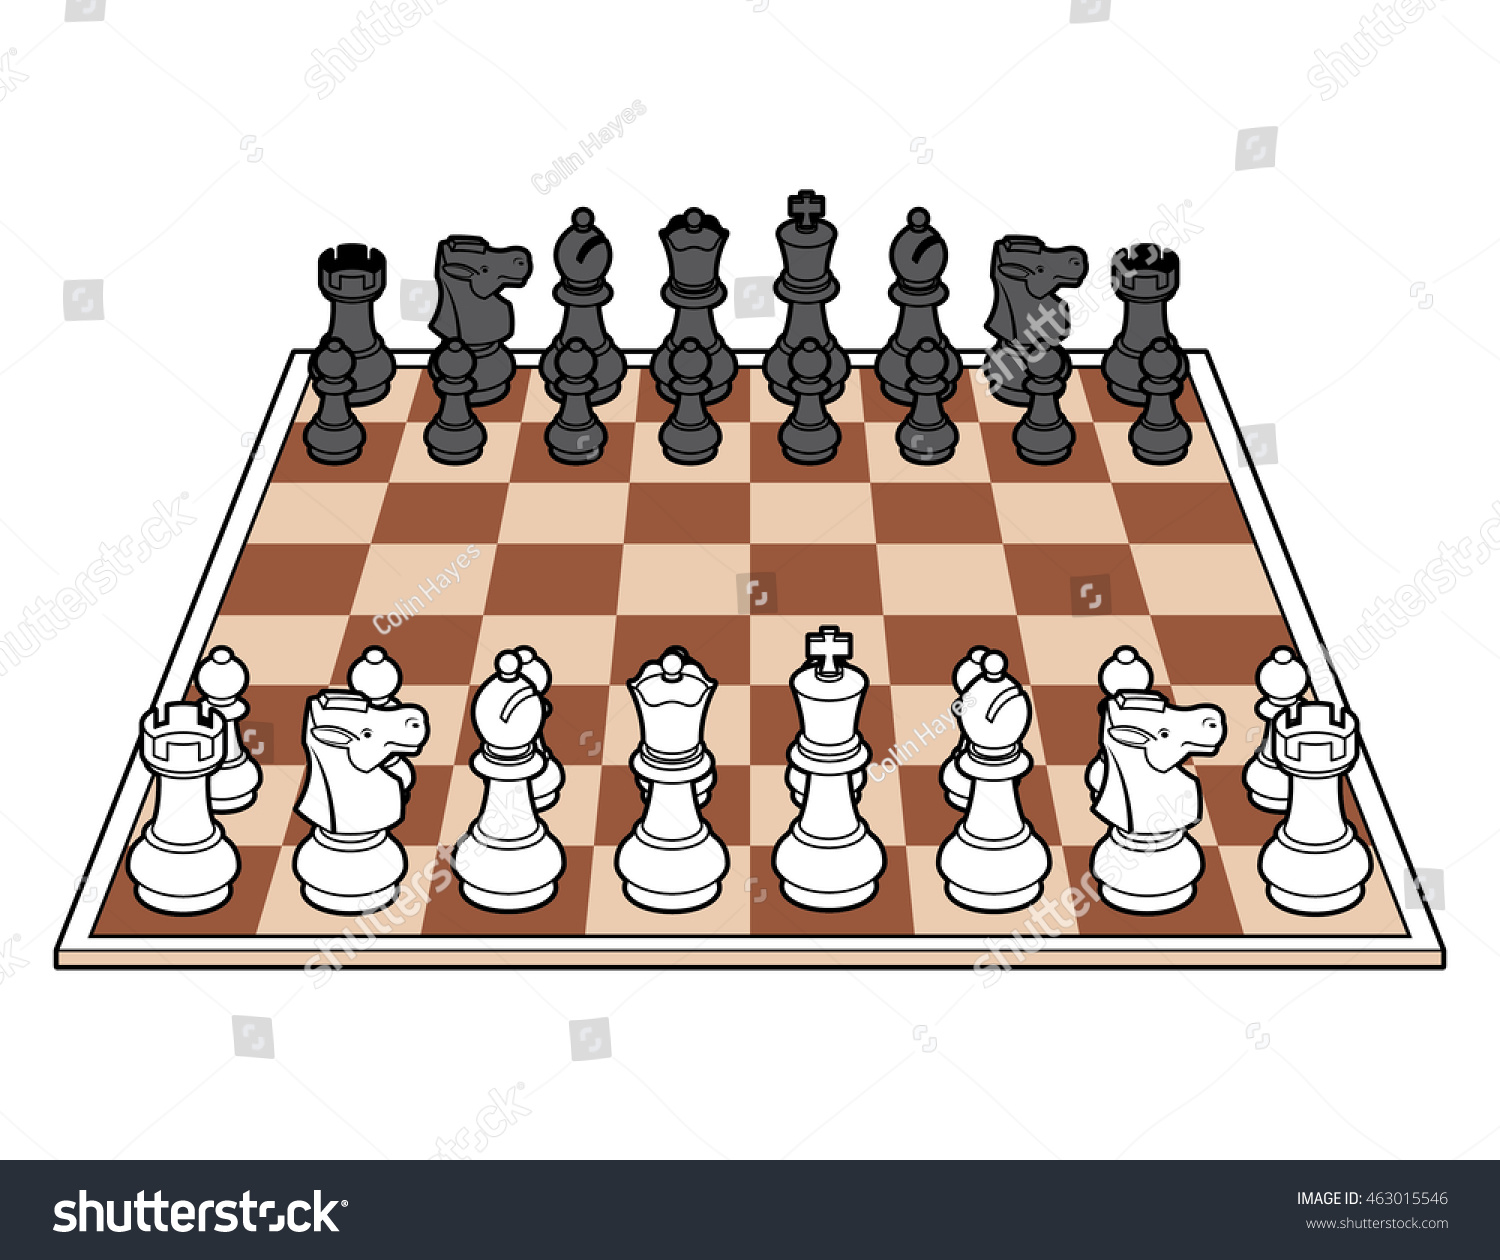 SVG of Chess board with all pieces in place, vector illustration. svg